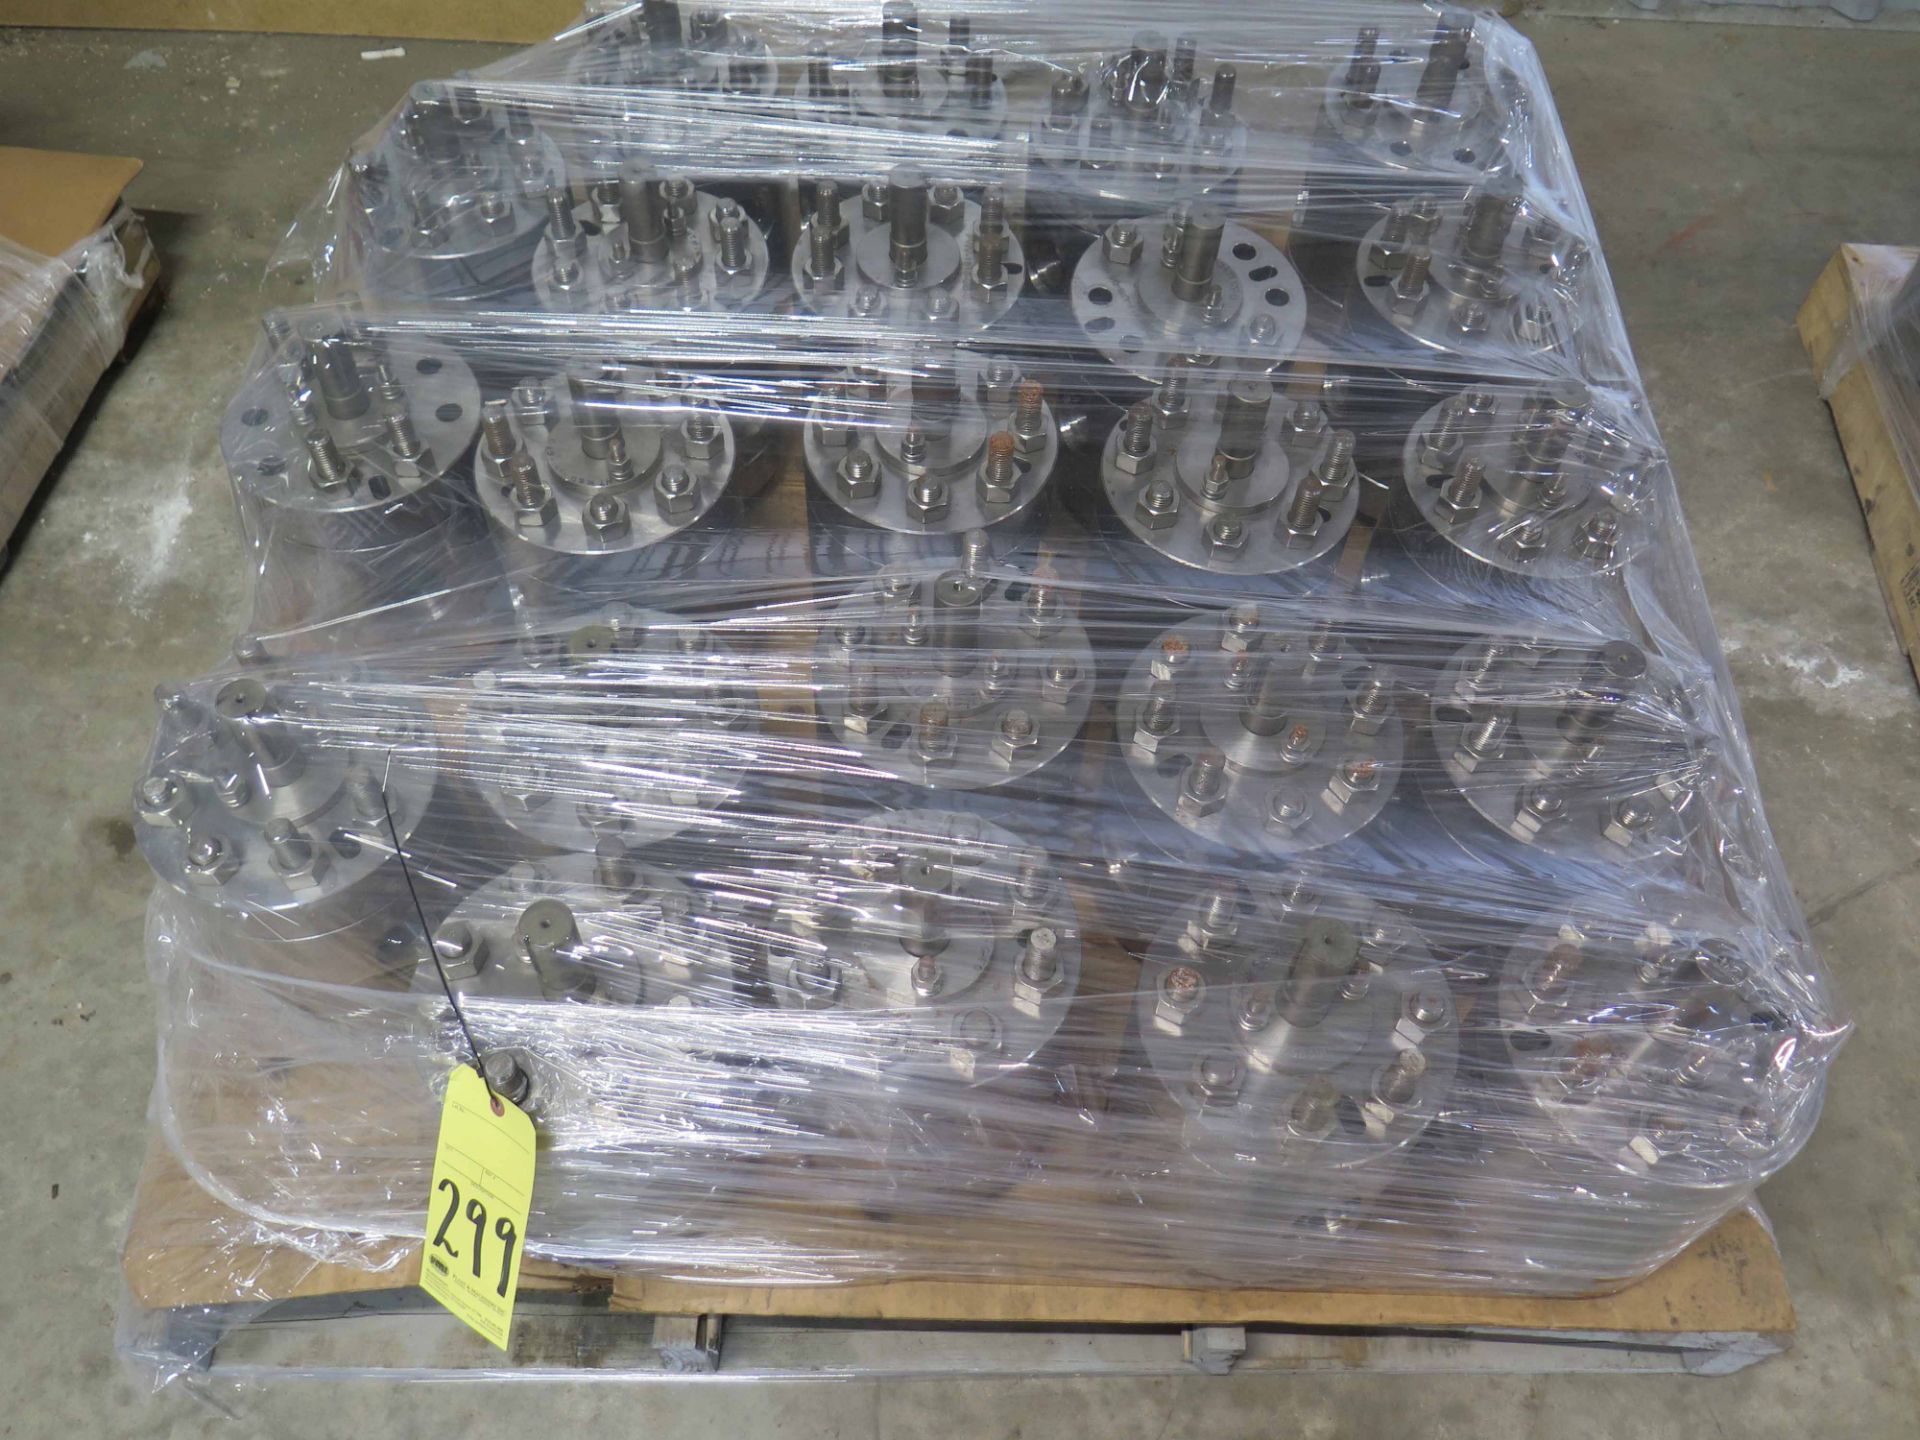 LOT OF ASSEMBLED BALL VALVES (23), 1-1/2" (on one pallet) - Image 2 of 2